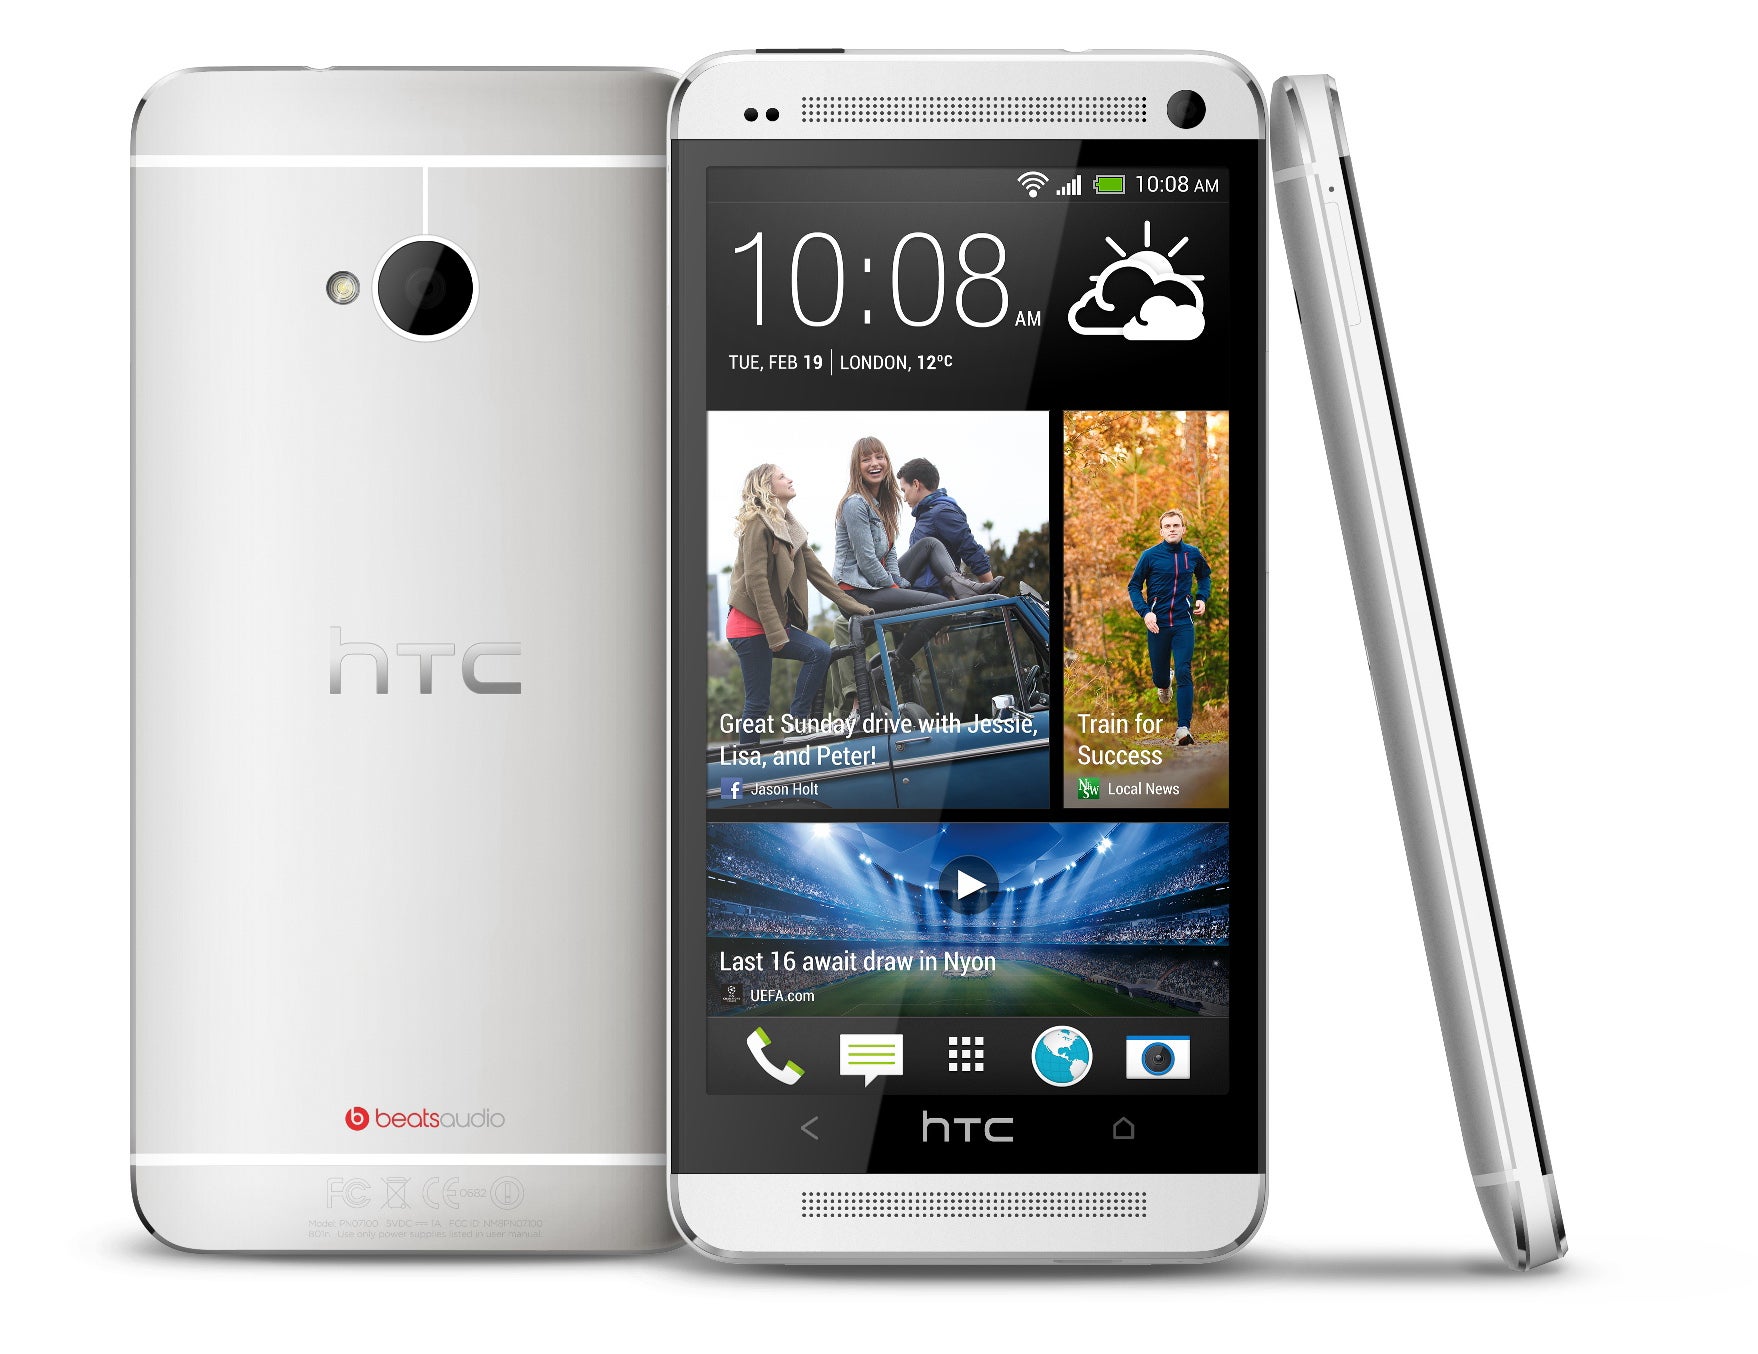 Can HTC hold together long enough to benefit from demand for the HTC One? - HTC One with larger screen coming?